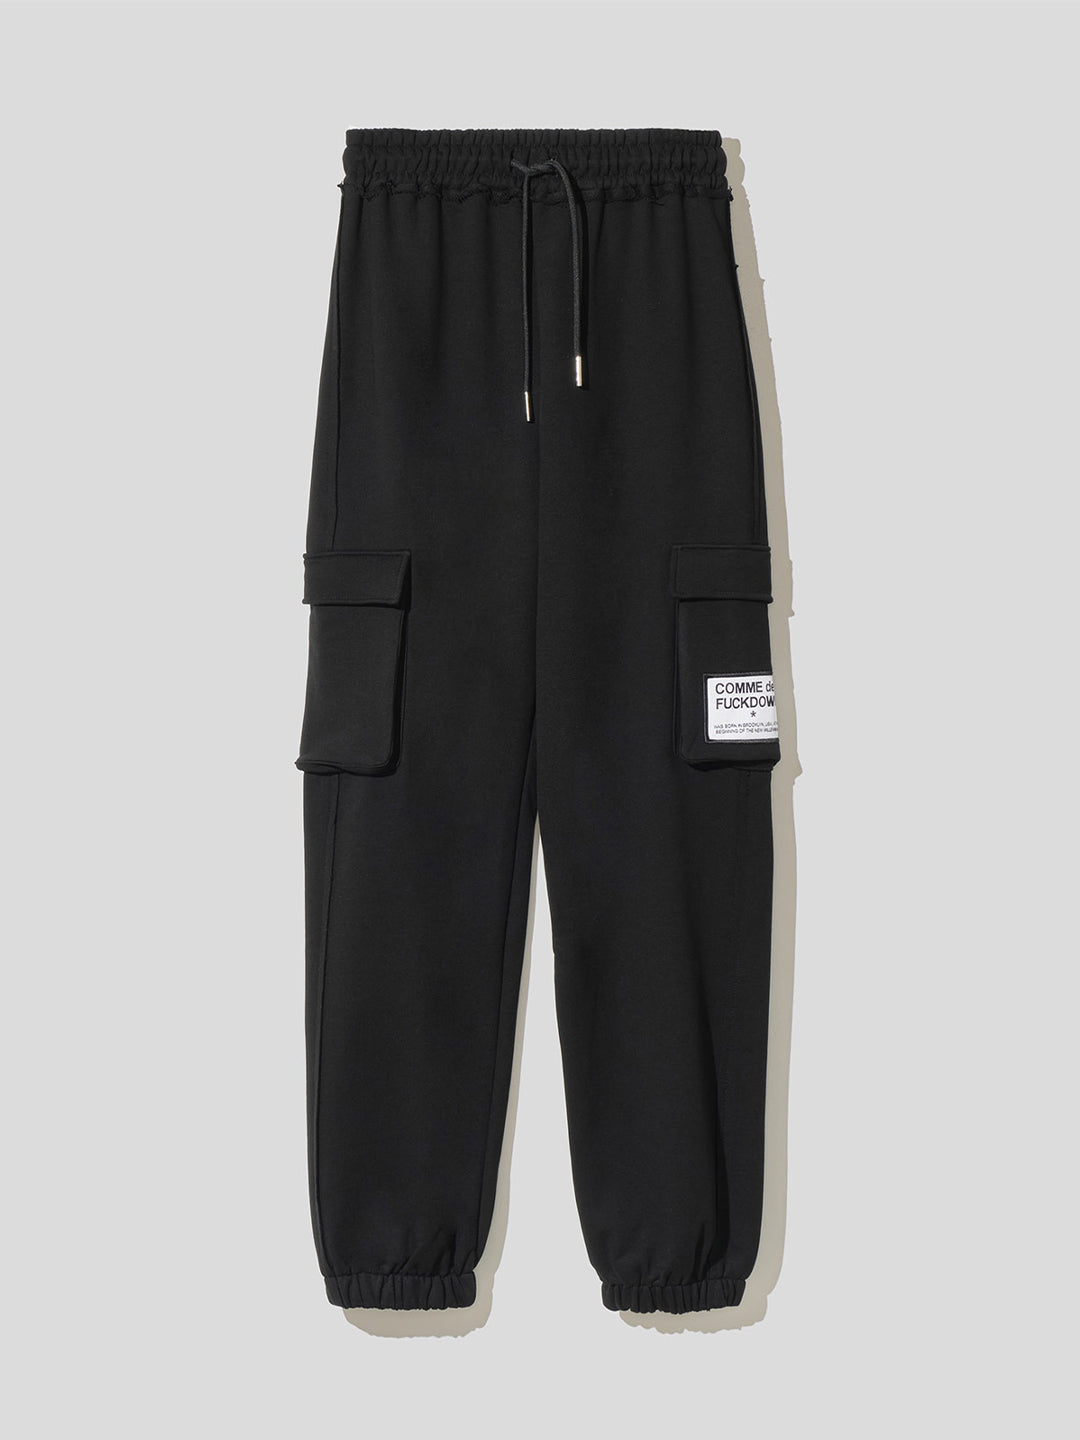 Comme des fuckdown black trousers with cargo pockets